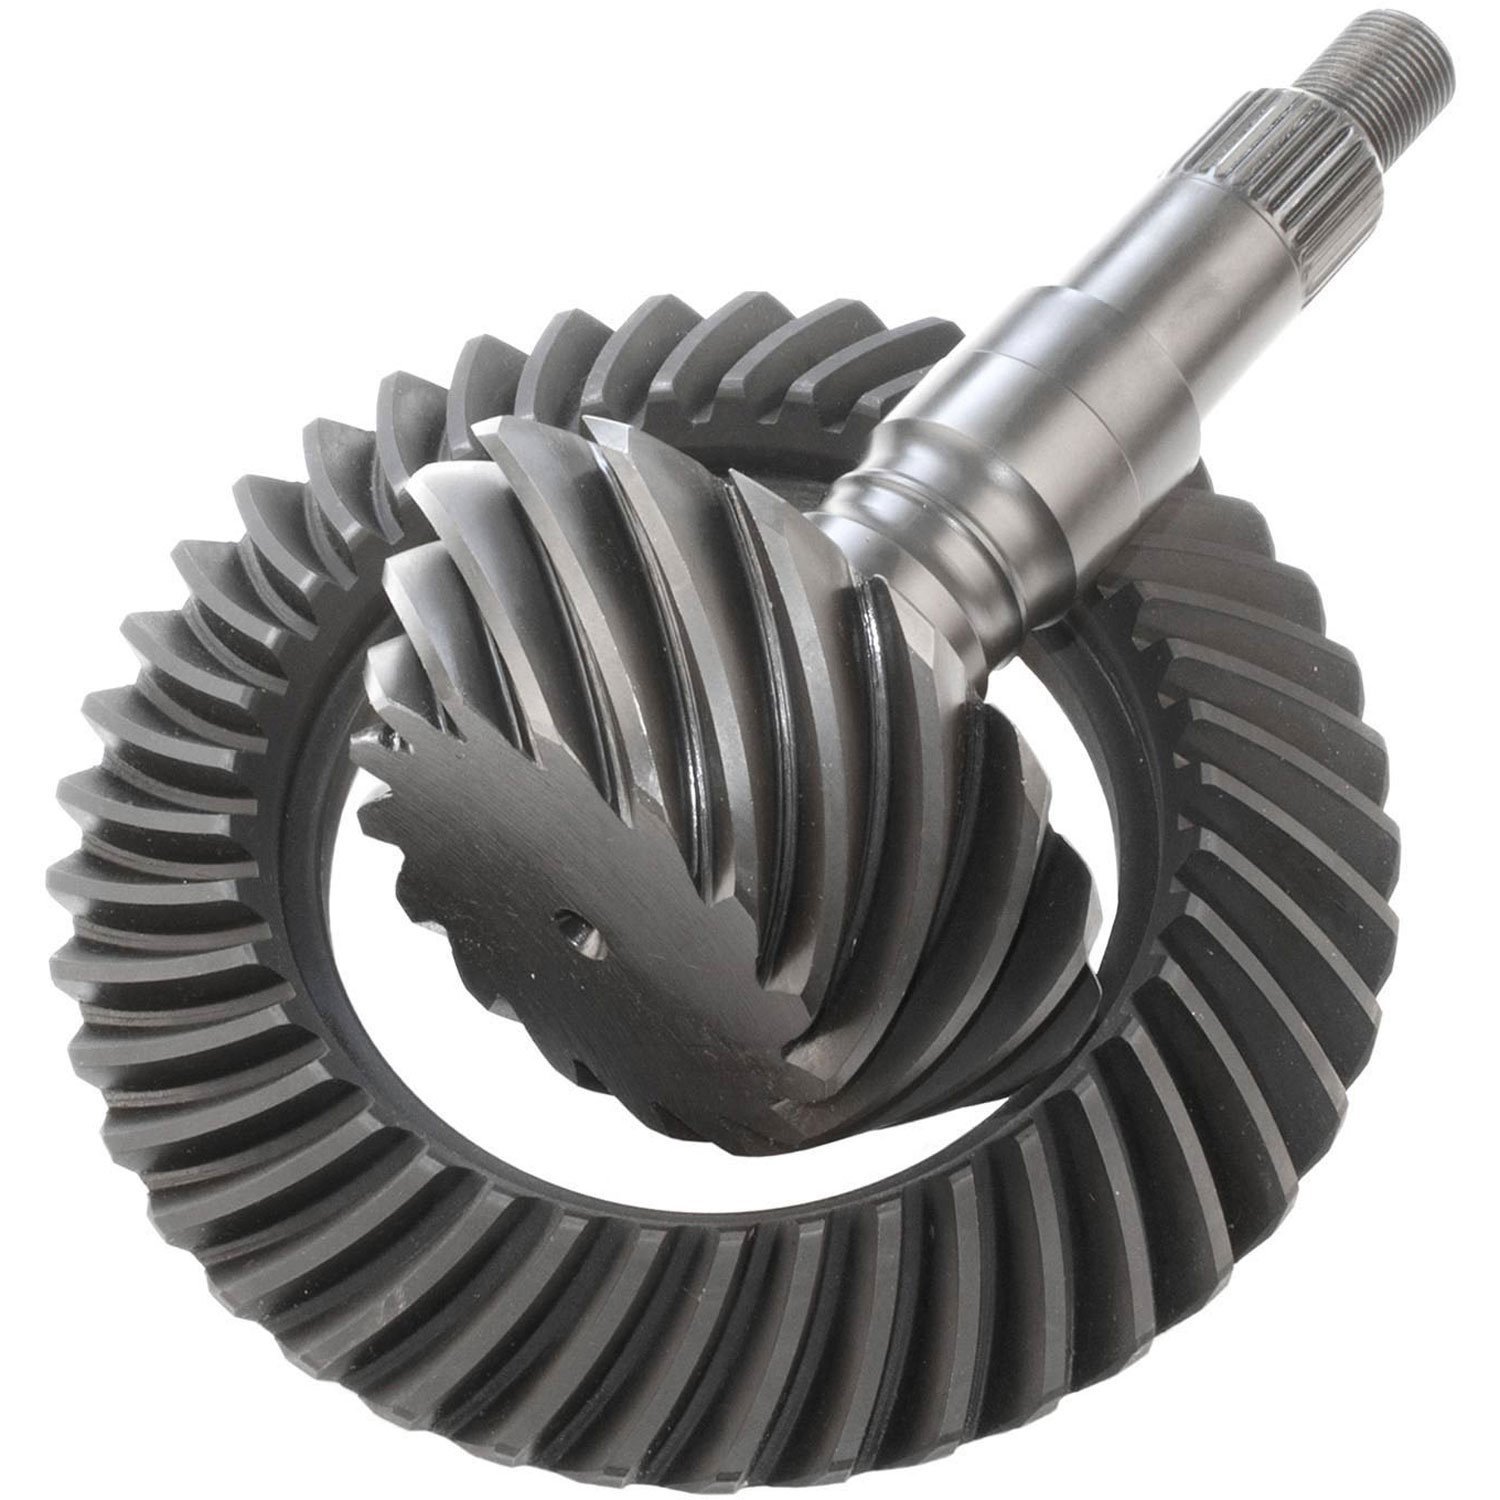 Ring And Pinion Ratio: 2.73